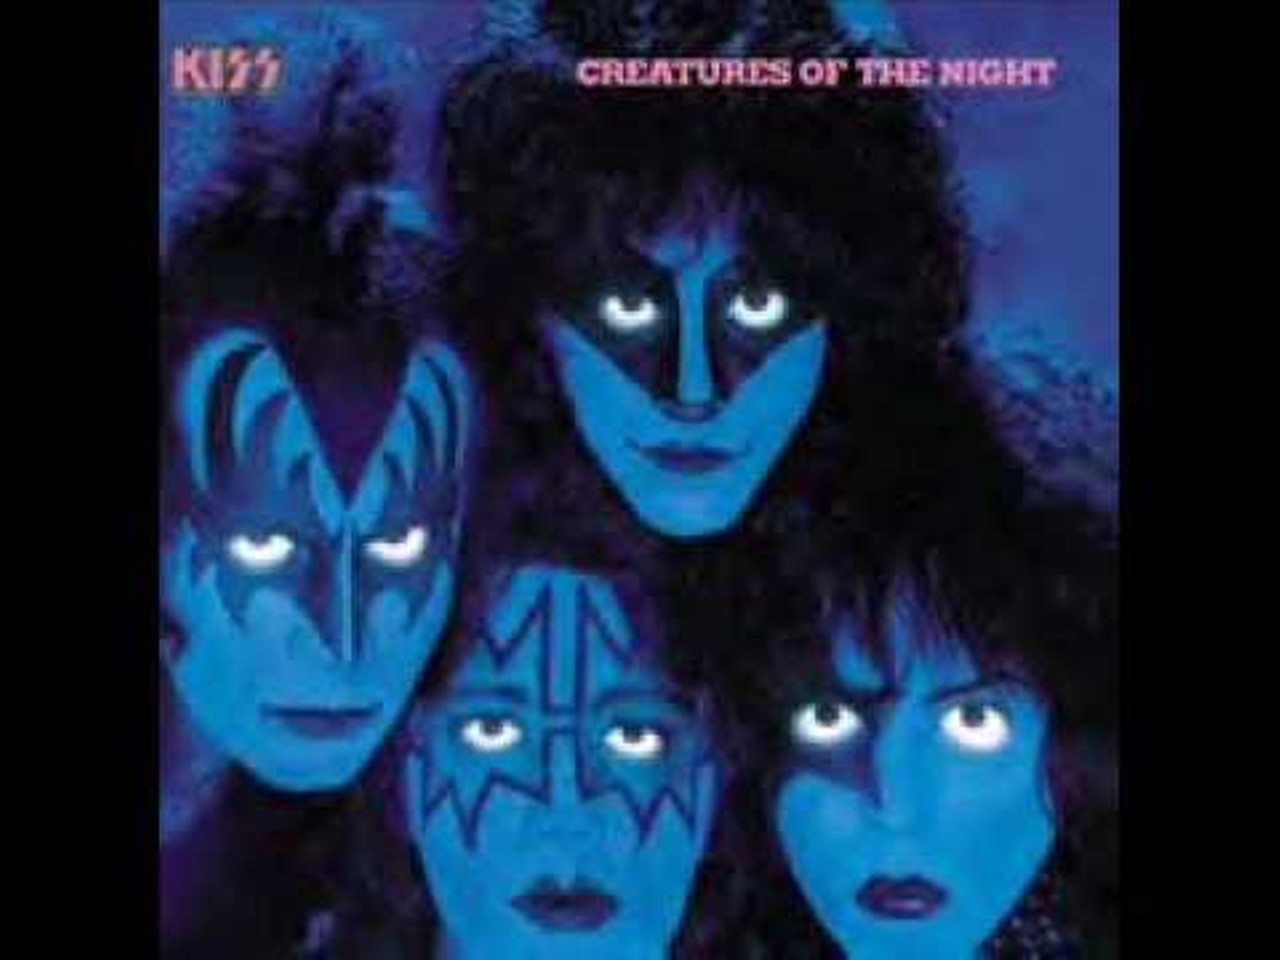 After the failure of Music From The Elder and dancing with disco sounds on Dynasty, KISS decided it needed to deliver in the rock department. Of the records made during the band’s makeup era, Creatures of the Night is the heaviest one. If you are a fan of ’80s rock then this one is for you. Ace Frehley appears on the album’s cover, but actually isn’t on the record. Vinnie Vincent, his replacement, shreds some slick solos. The problem with this record is that the band is trying so hard to gain macho credibility that it makes Creatures of the Night not as much fun as the traditional KISS record.